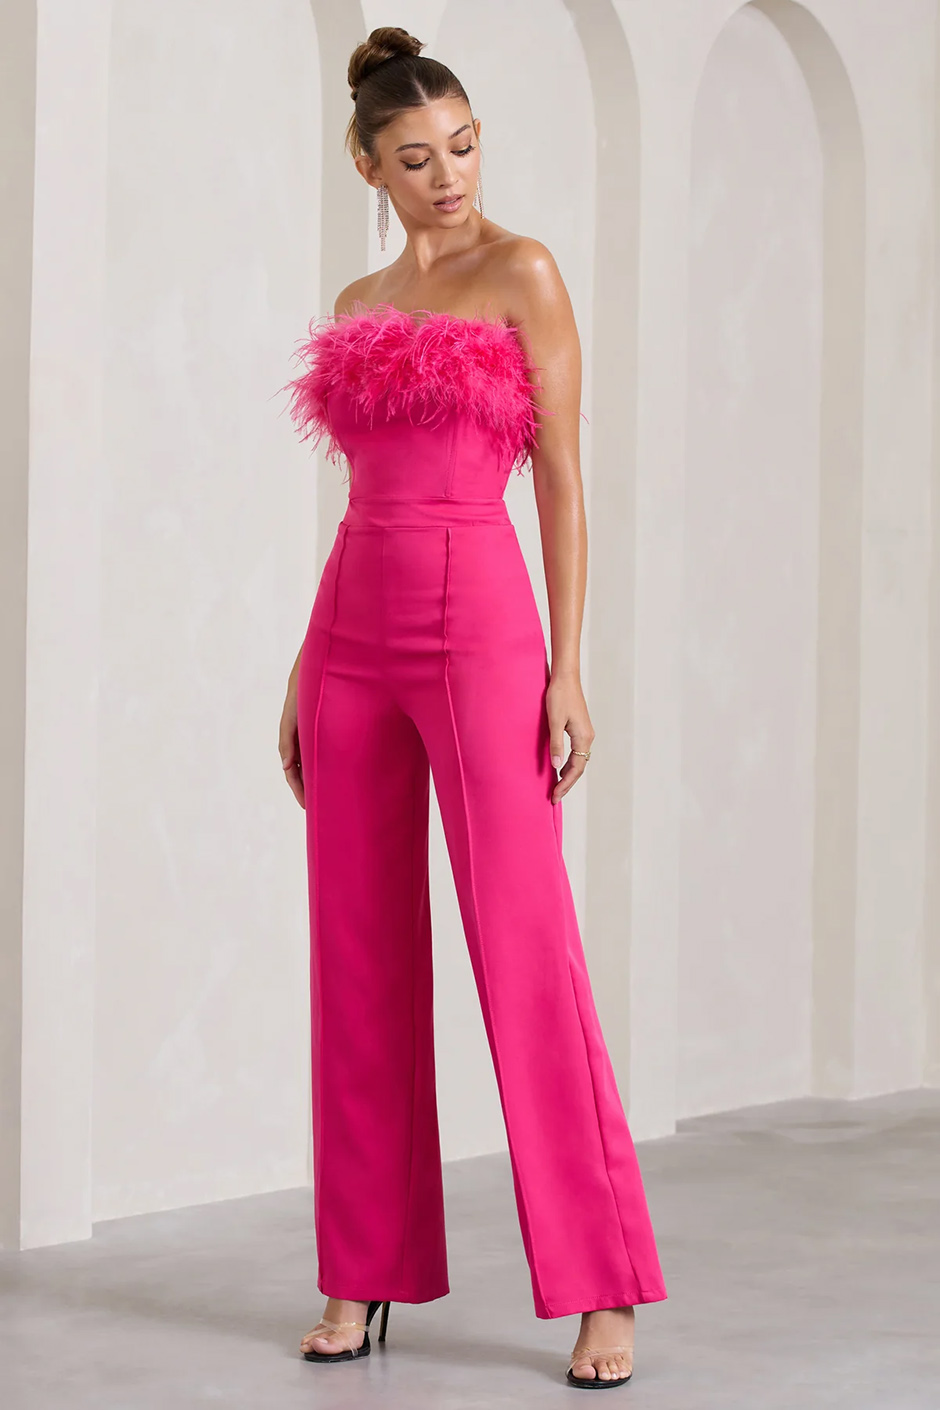 Hot pink bandeau jumpsuit with feather trim detail from Club L London